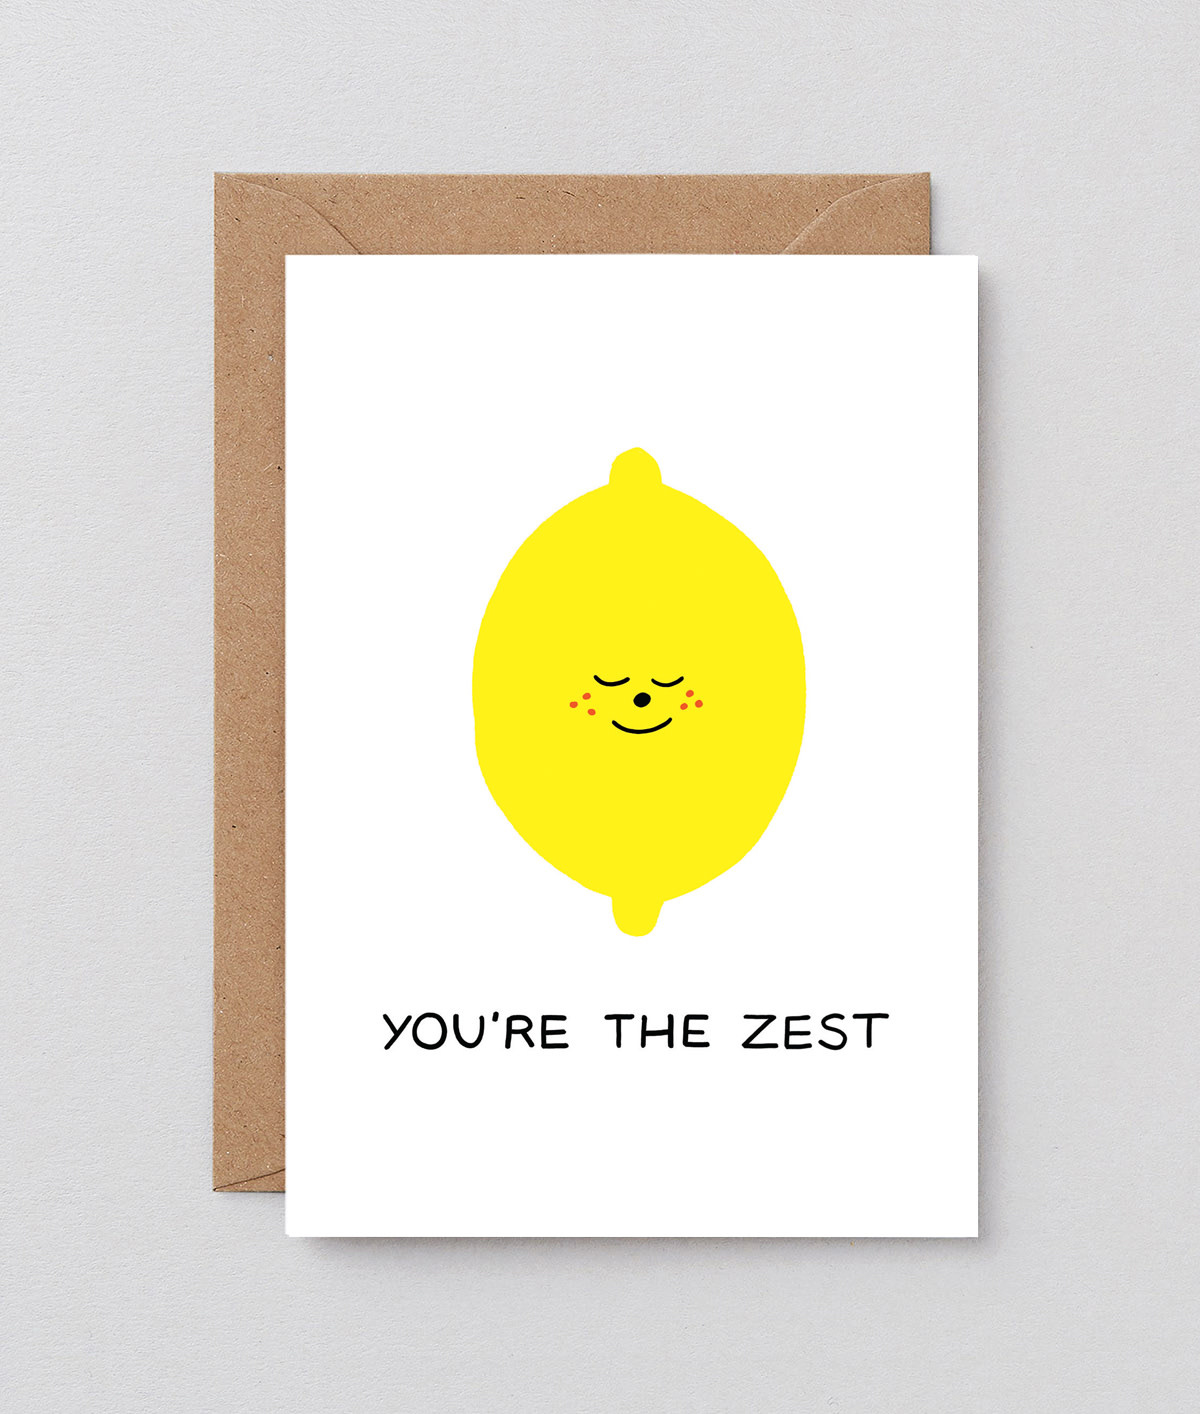 You’re the zest